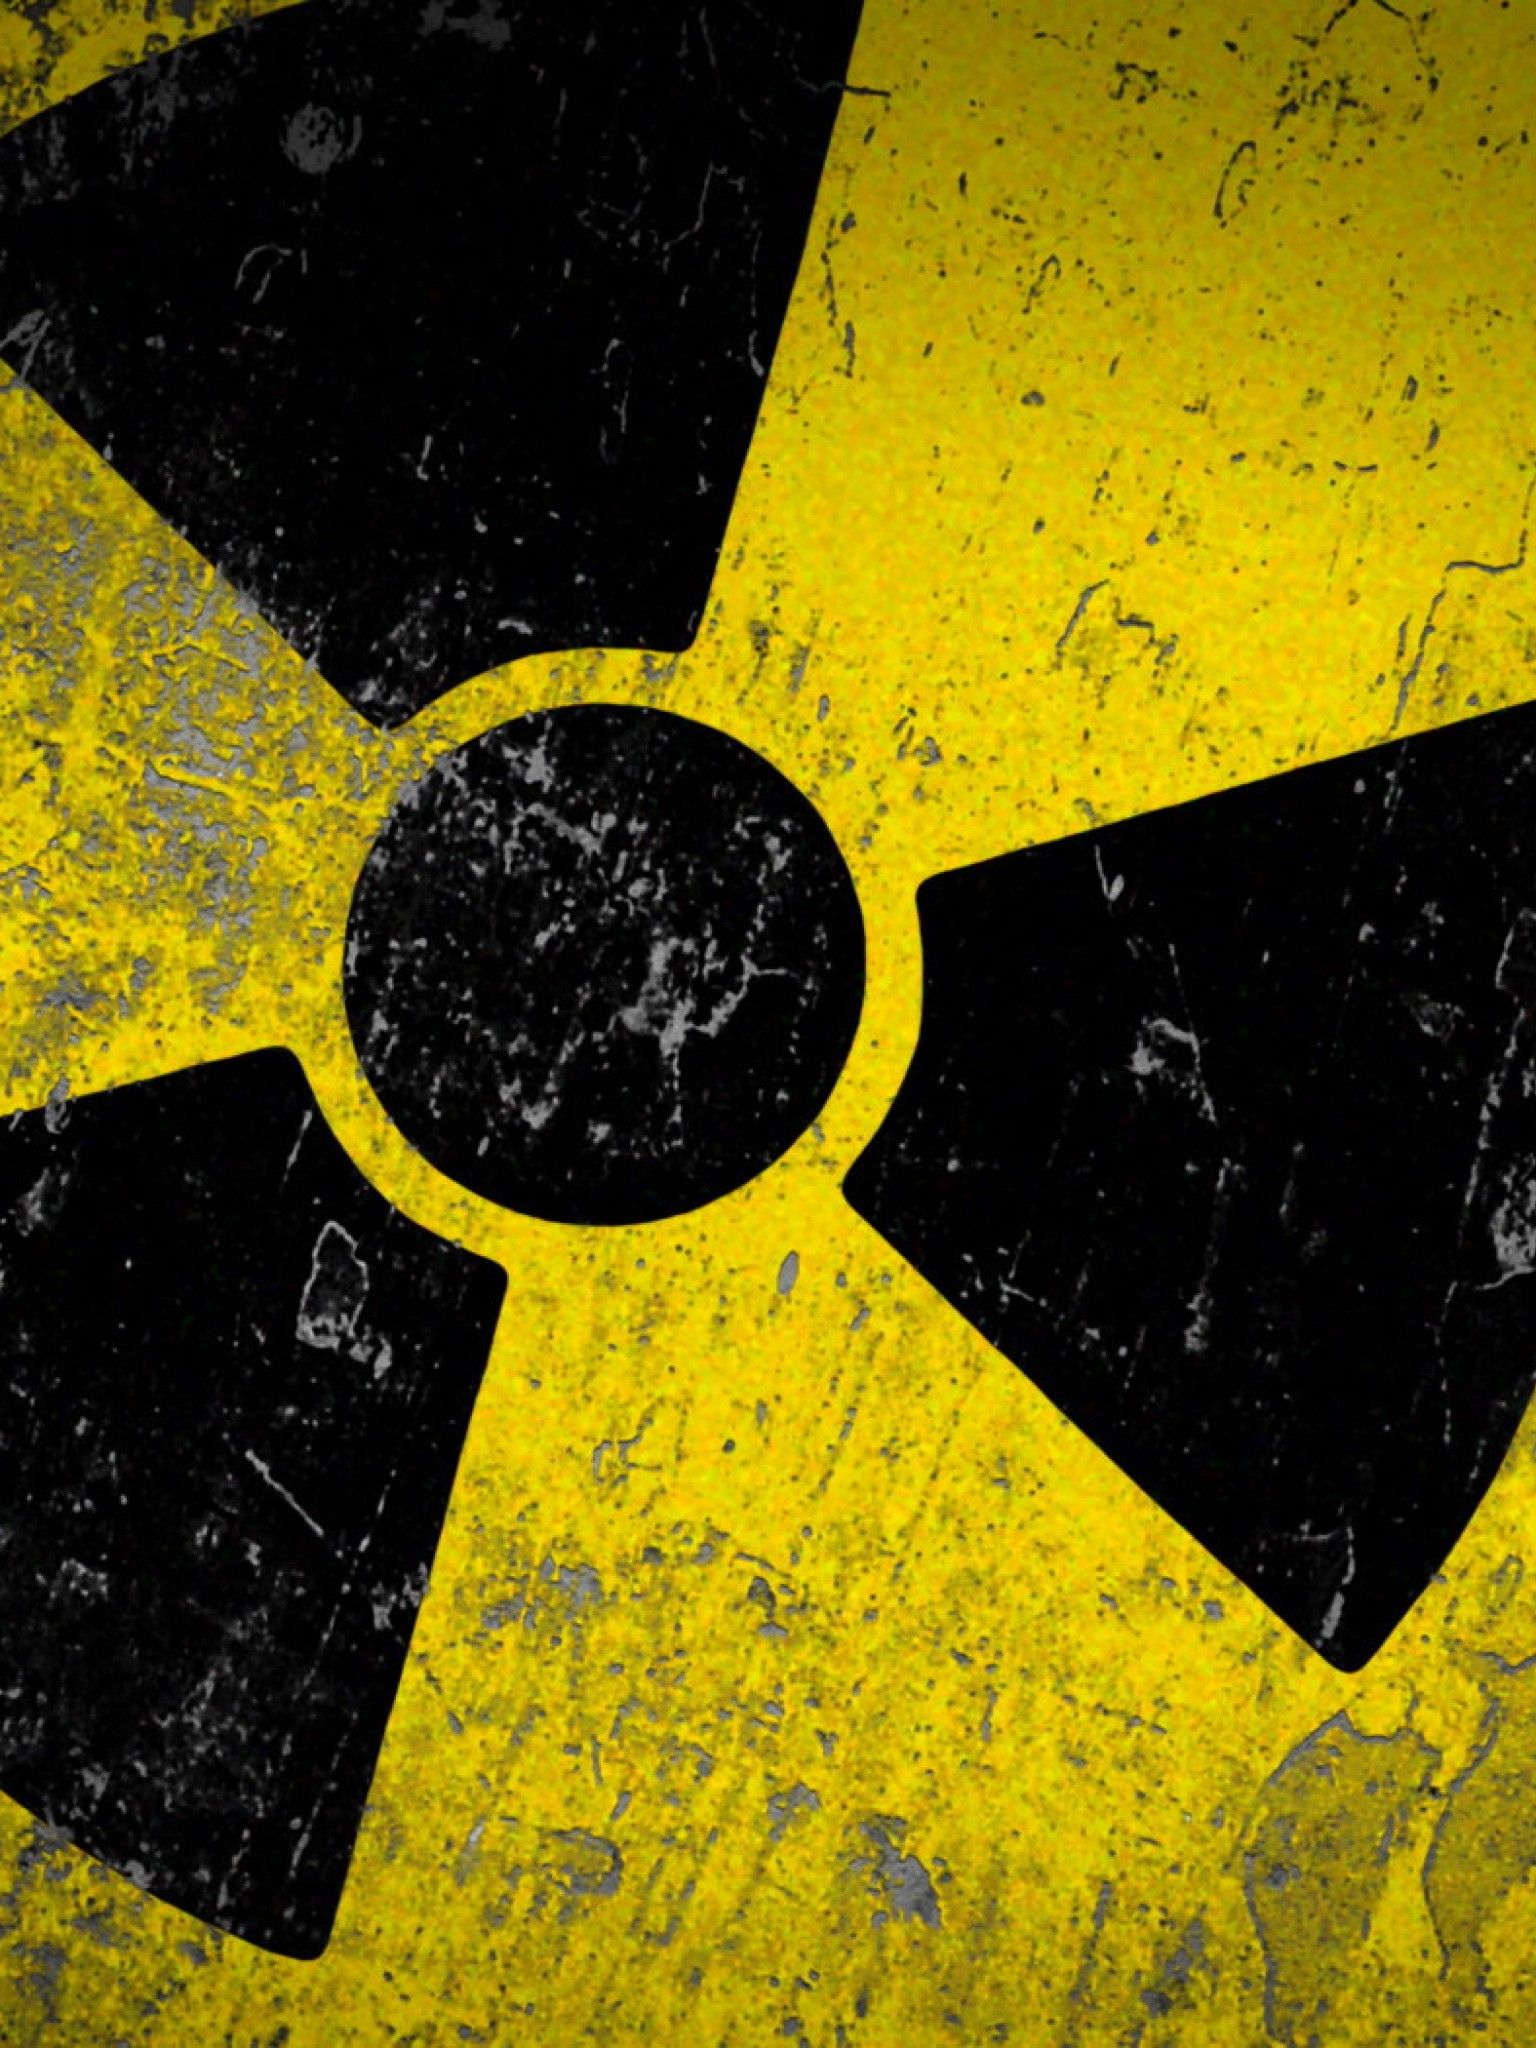 Warning radioactive sign HD Wallpaper available in different